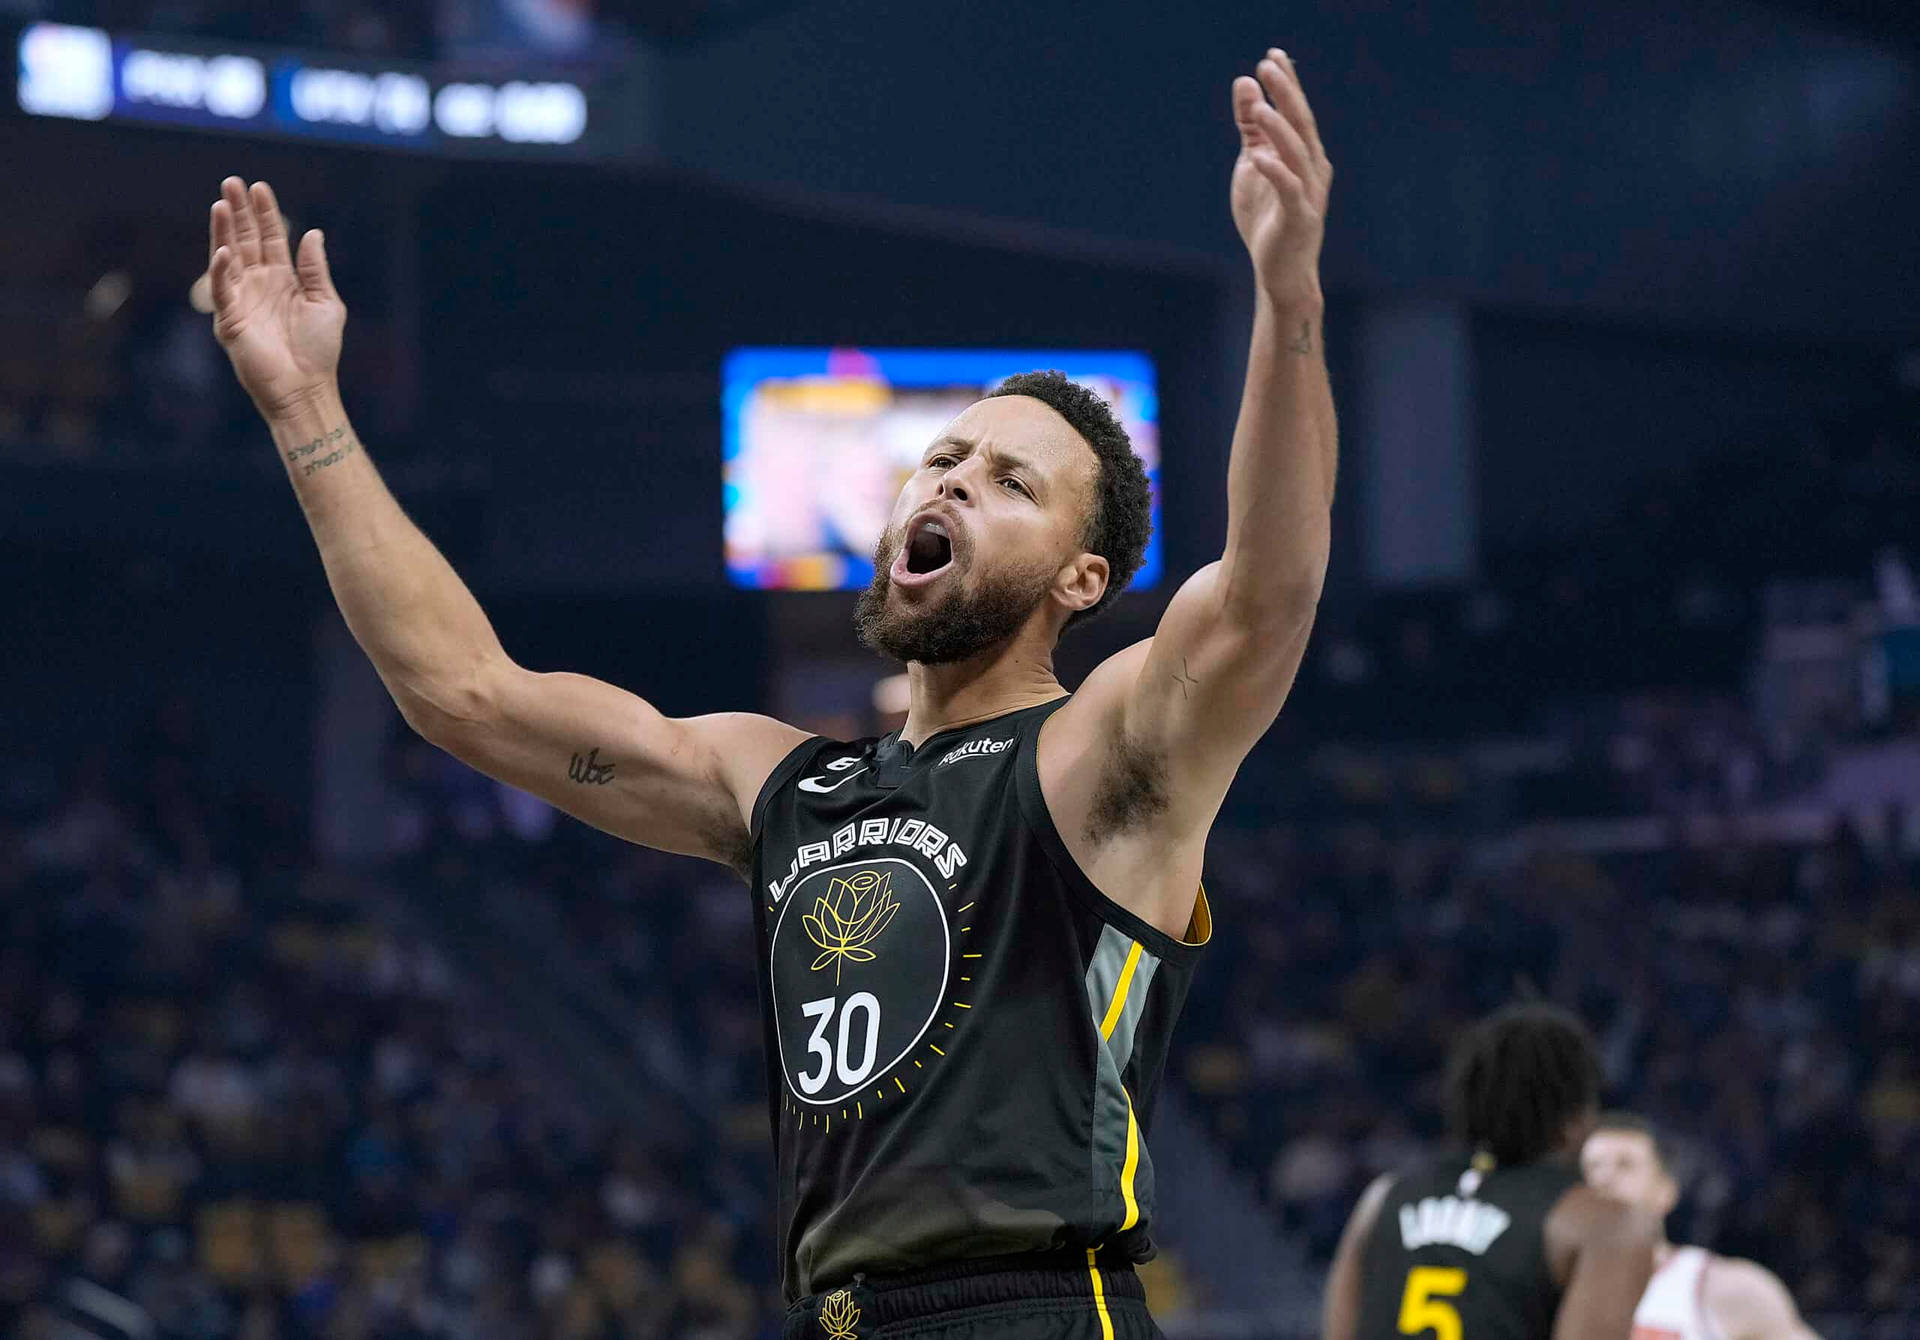 Steph Curry Celebrating With Arms Up